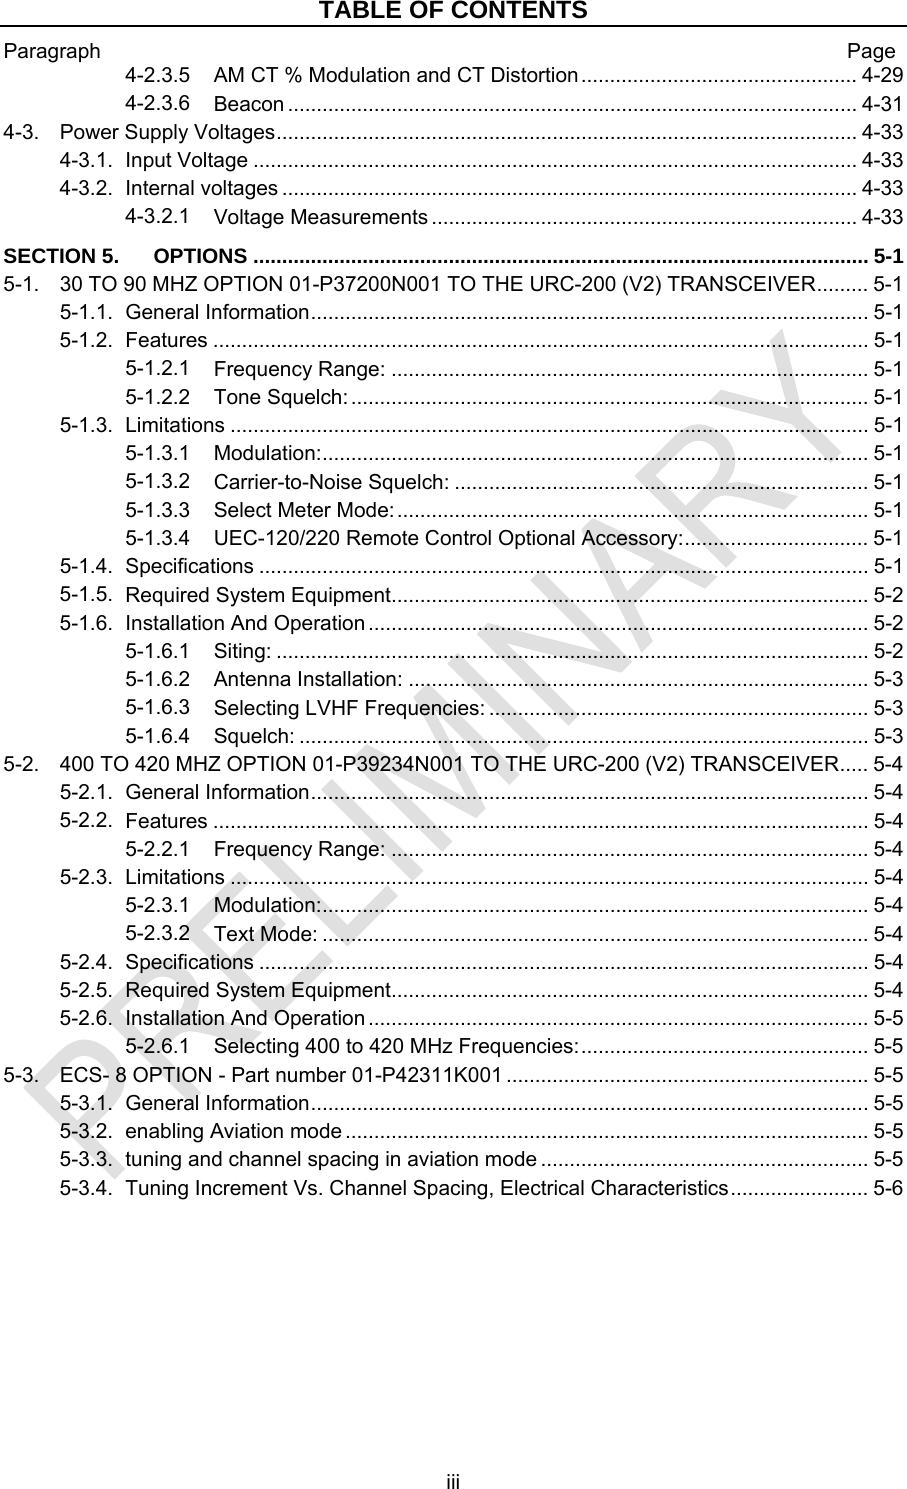 TABLE OF CONTENTS Paragraph  Page iii 4-2.3.5 ................................................ 4-29 AM CT % Modulation and CT Distortion4-2.3.6 ................................................................................................... 4-31 Beacon4-3. ..................................................................................................... 4-33 Power Supply Voltages4-3.1. ......................................................................................................... 4-33 Input Voltage4-3.2. .................................................................................................... 4-33 Internal voltages4-3.2.1 .......................................................................... 4-33 Voltage MeasurementsSECTION 5. ........................................................................................................... 5-1 OPTIONS5-1. ......... 5-1 30 TO 90 MHZ OPTION 01-P37200N001 TO THE URC-200 (V2) TRANSCEIVER5-1.1. ................................................................................................. 5-1 General Information5-1.2. .................................................................................................................. 5-1 Features5-1.2.1 ................................................................................... 5-1 Frequency Range:5-1.2.2 .......................................................................................... 5-1 Tone Squelch:5-1.3. ............................................................................................................... 5-1 Limitations5-1.3.1 ............................................................................................... 5-1 Modulation:5-1.3.2 ........................................................................ 5-1 Carrier-to-Noise Squelch:5-1.3.3 .................................................................................. 5-1 Select Meter Mode:5-1.3.4 ................................ 5-1 UEC-120/220 Remote Control Optional Accessory:5-1.4. .......................................................................................................... 5-1 Specifications5-1.5. ................................................................................... 5-2 Required System Equipment5-1.6. ....................................................................................... 5-2 Installation And Operation5-1.6.1 ....................................................................................................... 5-2 Siting:5-1.6.2 ................................................................................ 5-3 Antenna Installation:5-1.6.3 .................................................................. 5-3 Selecting LVHF Frequencies:5-1.6.4 ................................................................................................... 5-3 Squelch:5-2. ..... 5-4 400 TO 420 MHZ OPTION 01-P39234N001 TO THE URC-200 (V2) TRANSCEIVER5-2.1. ................................................................................................. 5-4 General Information5-2.2. .................................................................................................................. 5-4 Features5-2.2.1 ................................................................................... 5-4 Frequency Range:5-2.3. ............................................................................................................... 5-4 Limitations5-2.3.1 ............................................................................................... 5-4 Modulation:5-2.3.2 ............................................................................................... 5-4 Text Mode:5-2.4. .......................................................................................................... 5-4 Specifications5-2.5. ................................................................................... 5-4 Required System Equipment5-2.6. ....................................................................................... 5-5 Installation And Operation5-2.6.1 .................................................. 5-5 Selecting 400 to 420 MHz Frequencies:5-3. ............................................................... 5-5 ECS- 8 OPTION - Part number 01-P42311K0015-3.1. ................................................................................................. 5-5 General Information5-3.2. ........................................................................................... 5-5 enabling Aviation mode5-3.3. ......................................................... 5-5 tuning and channel spacing in aviation mode5-3.4. ........................ 5-6 Tuning Increment Vs. Channel Spacing, Electrical Characteristics 